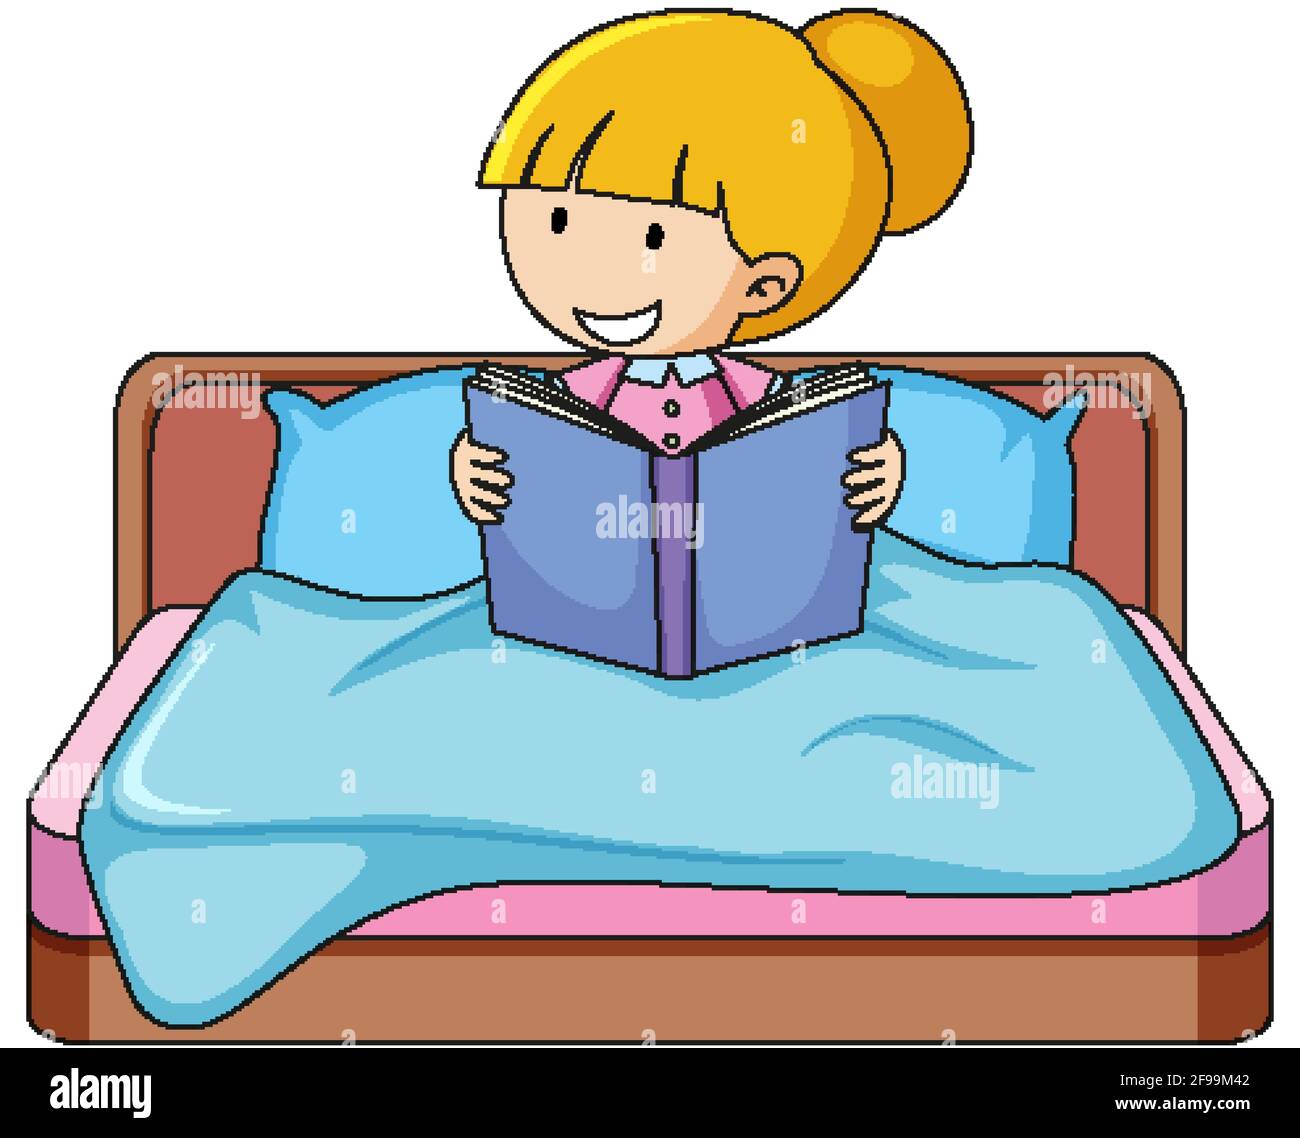 A girl reading book and sitting on a bed illustration Stock Vector ...